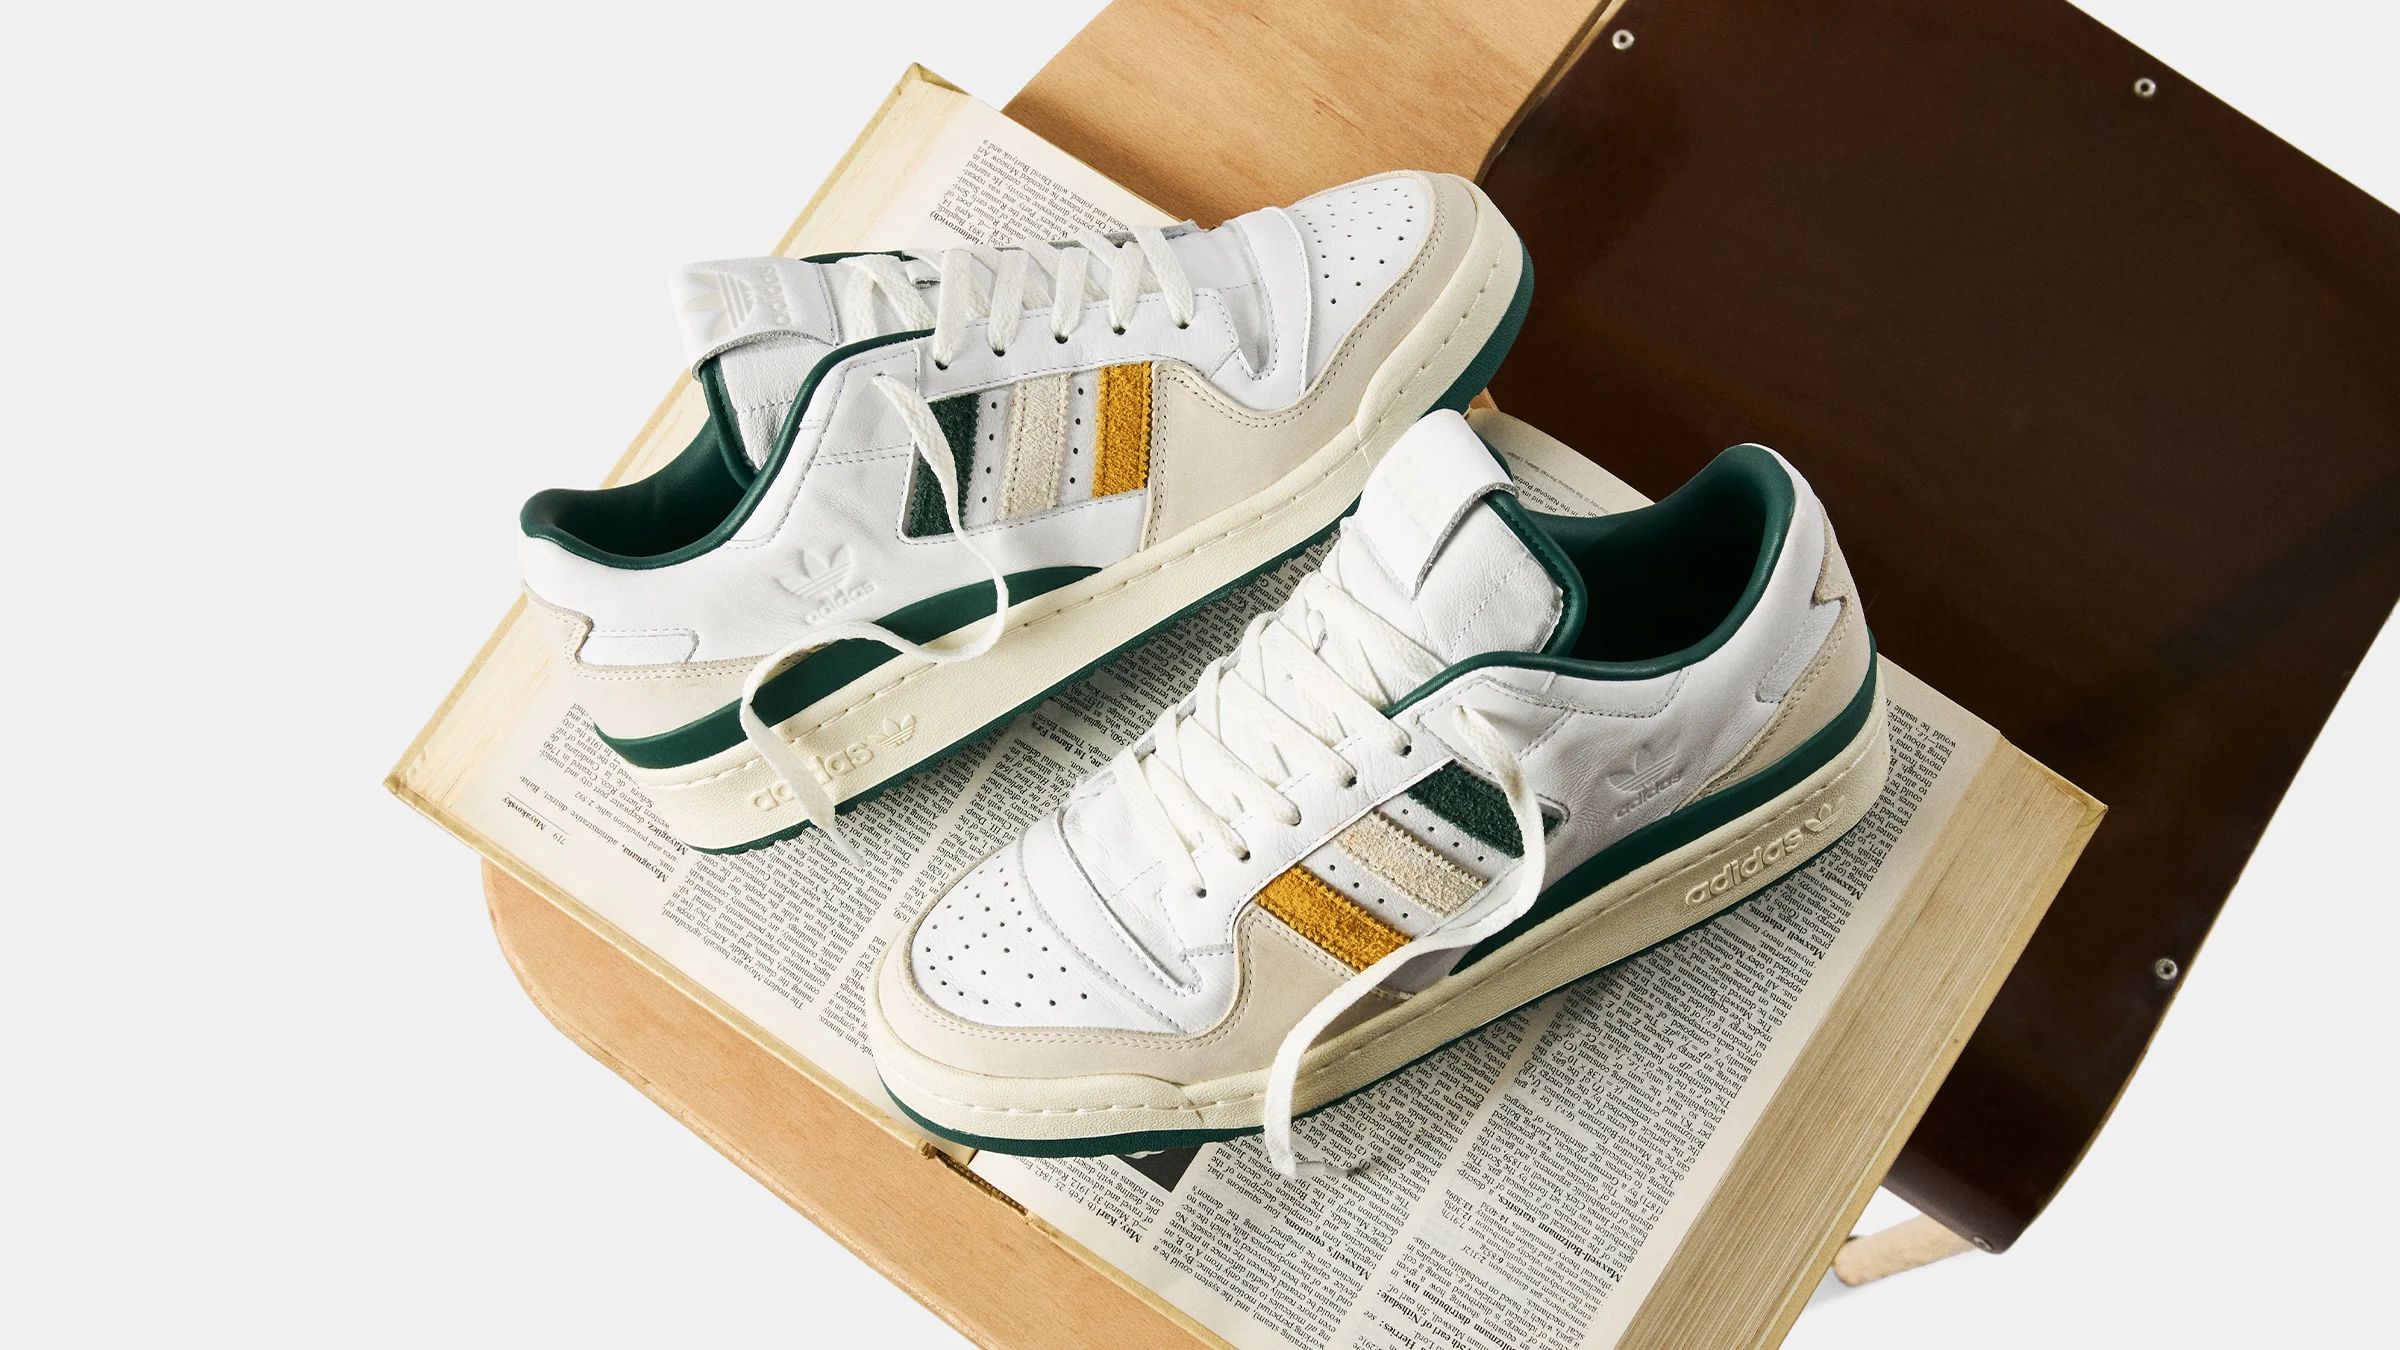 Pre-owned Adidas Originals X End. Forum Advance Varsity Limited Edition Shoes In White Green